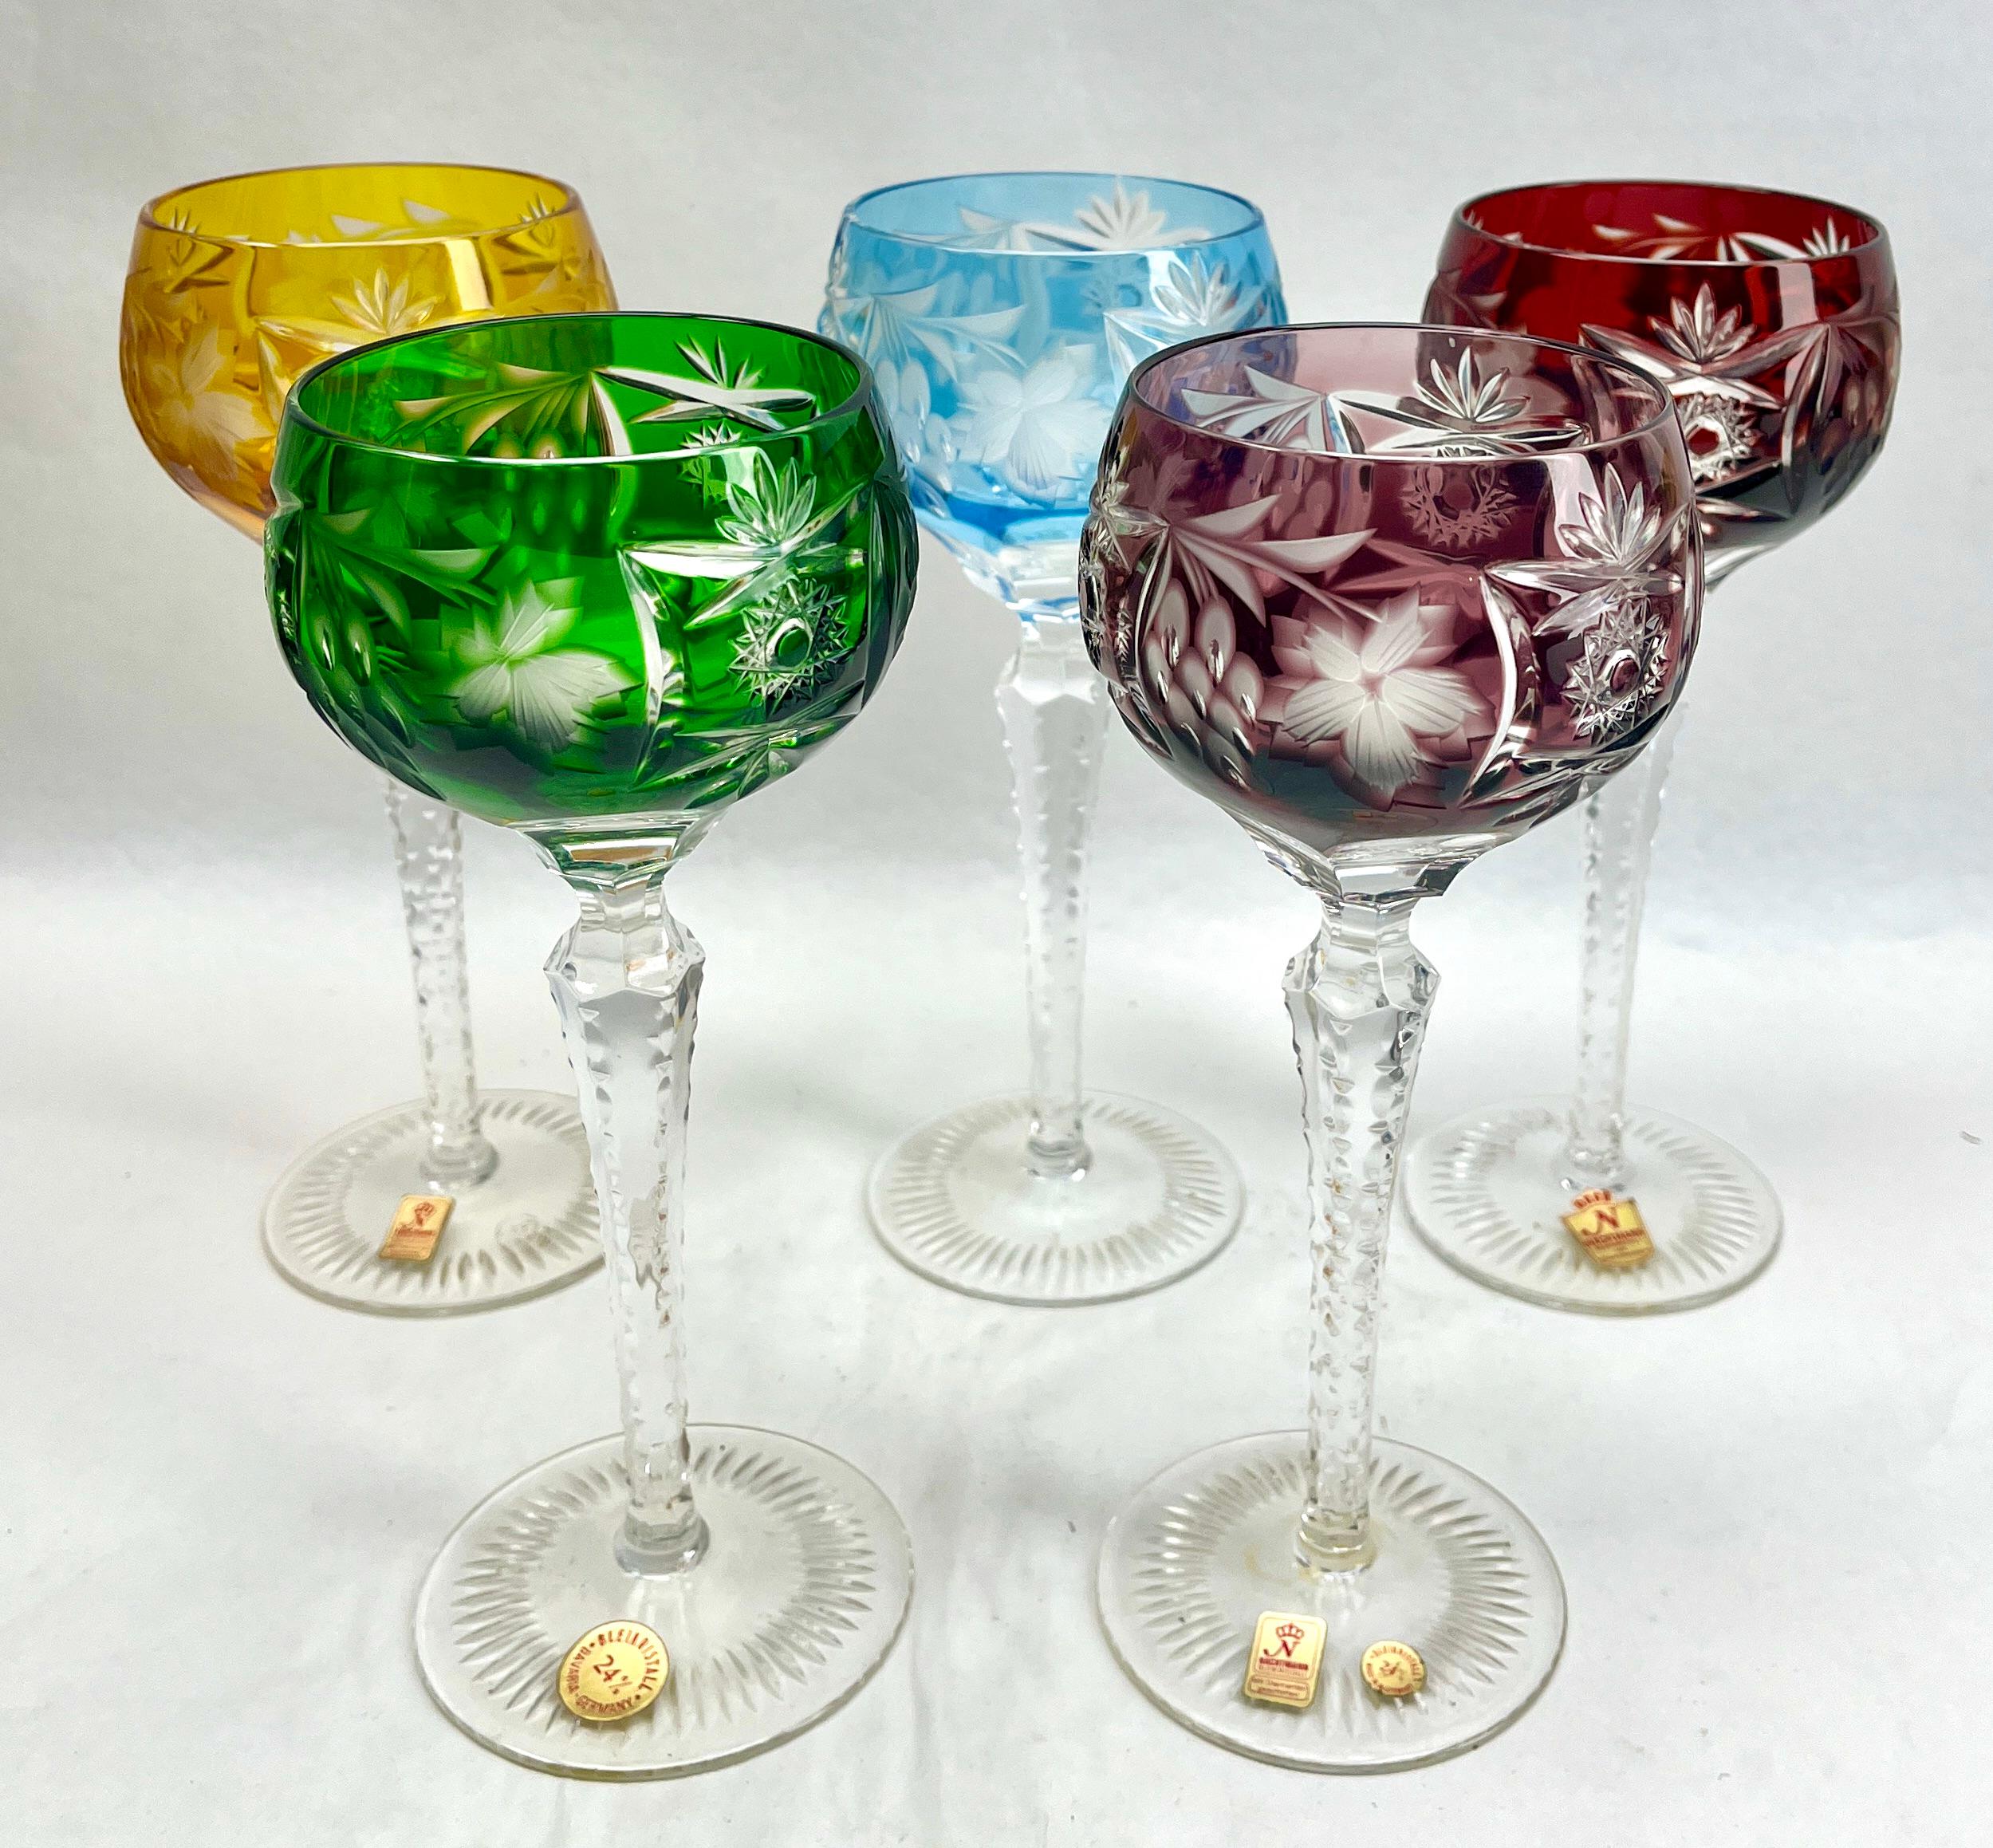 Vintage set of 5 cut to clear crystal stem glasses.
Mix crystal (Bleikristall 24% Mundgeblasen Handgeschliffen) glasses

Clear demi crystal glass. Side facetted and toothed stem. 
The bowl with a colored overlay cut to clear.
In best